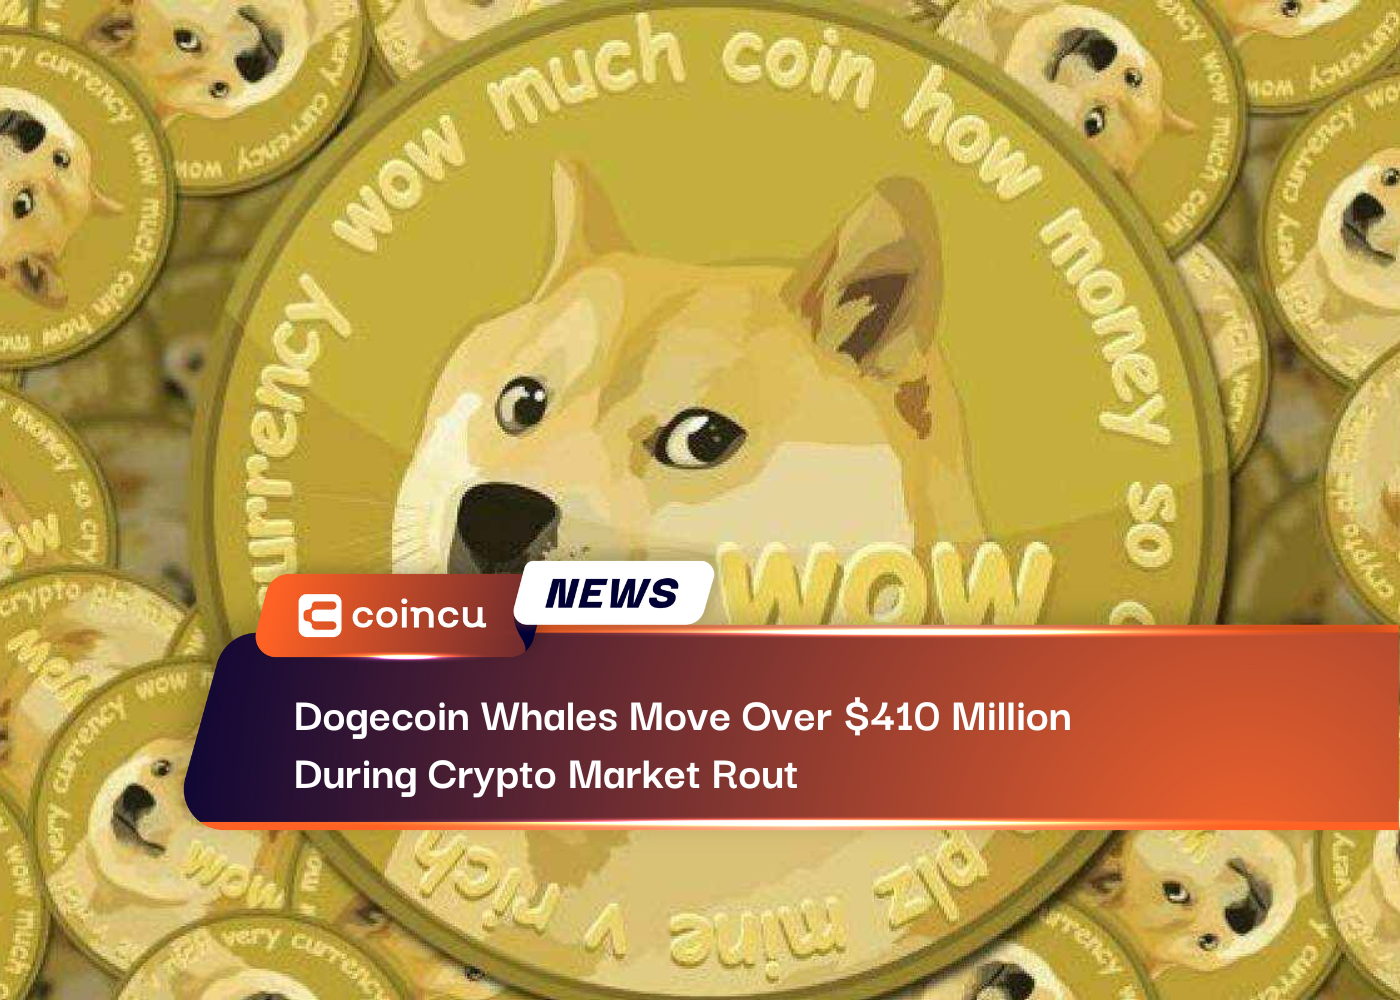 Dogecoin Whales Move Over 410 Million